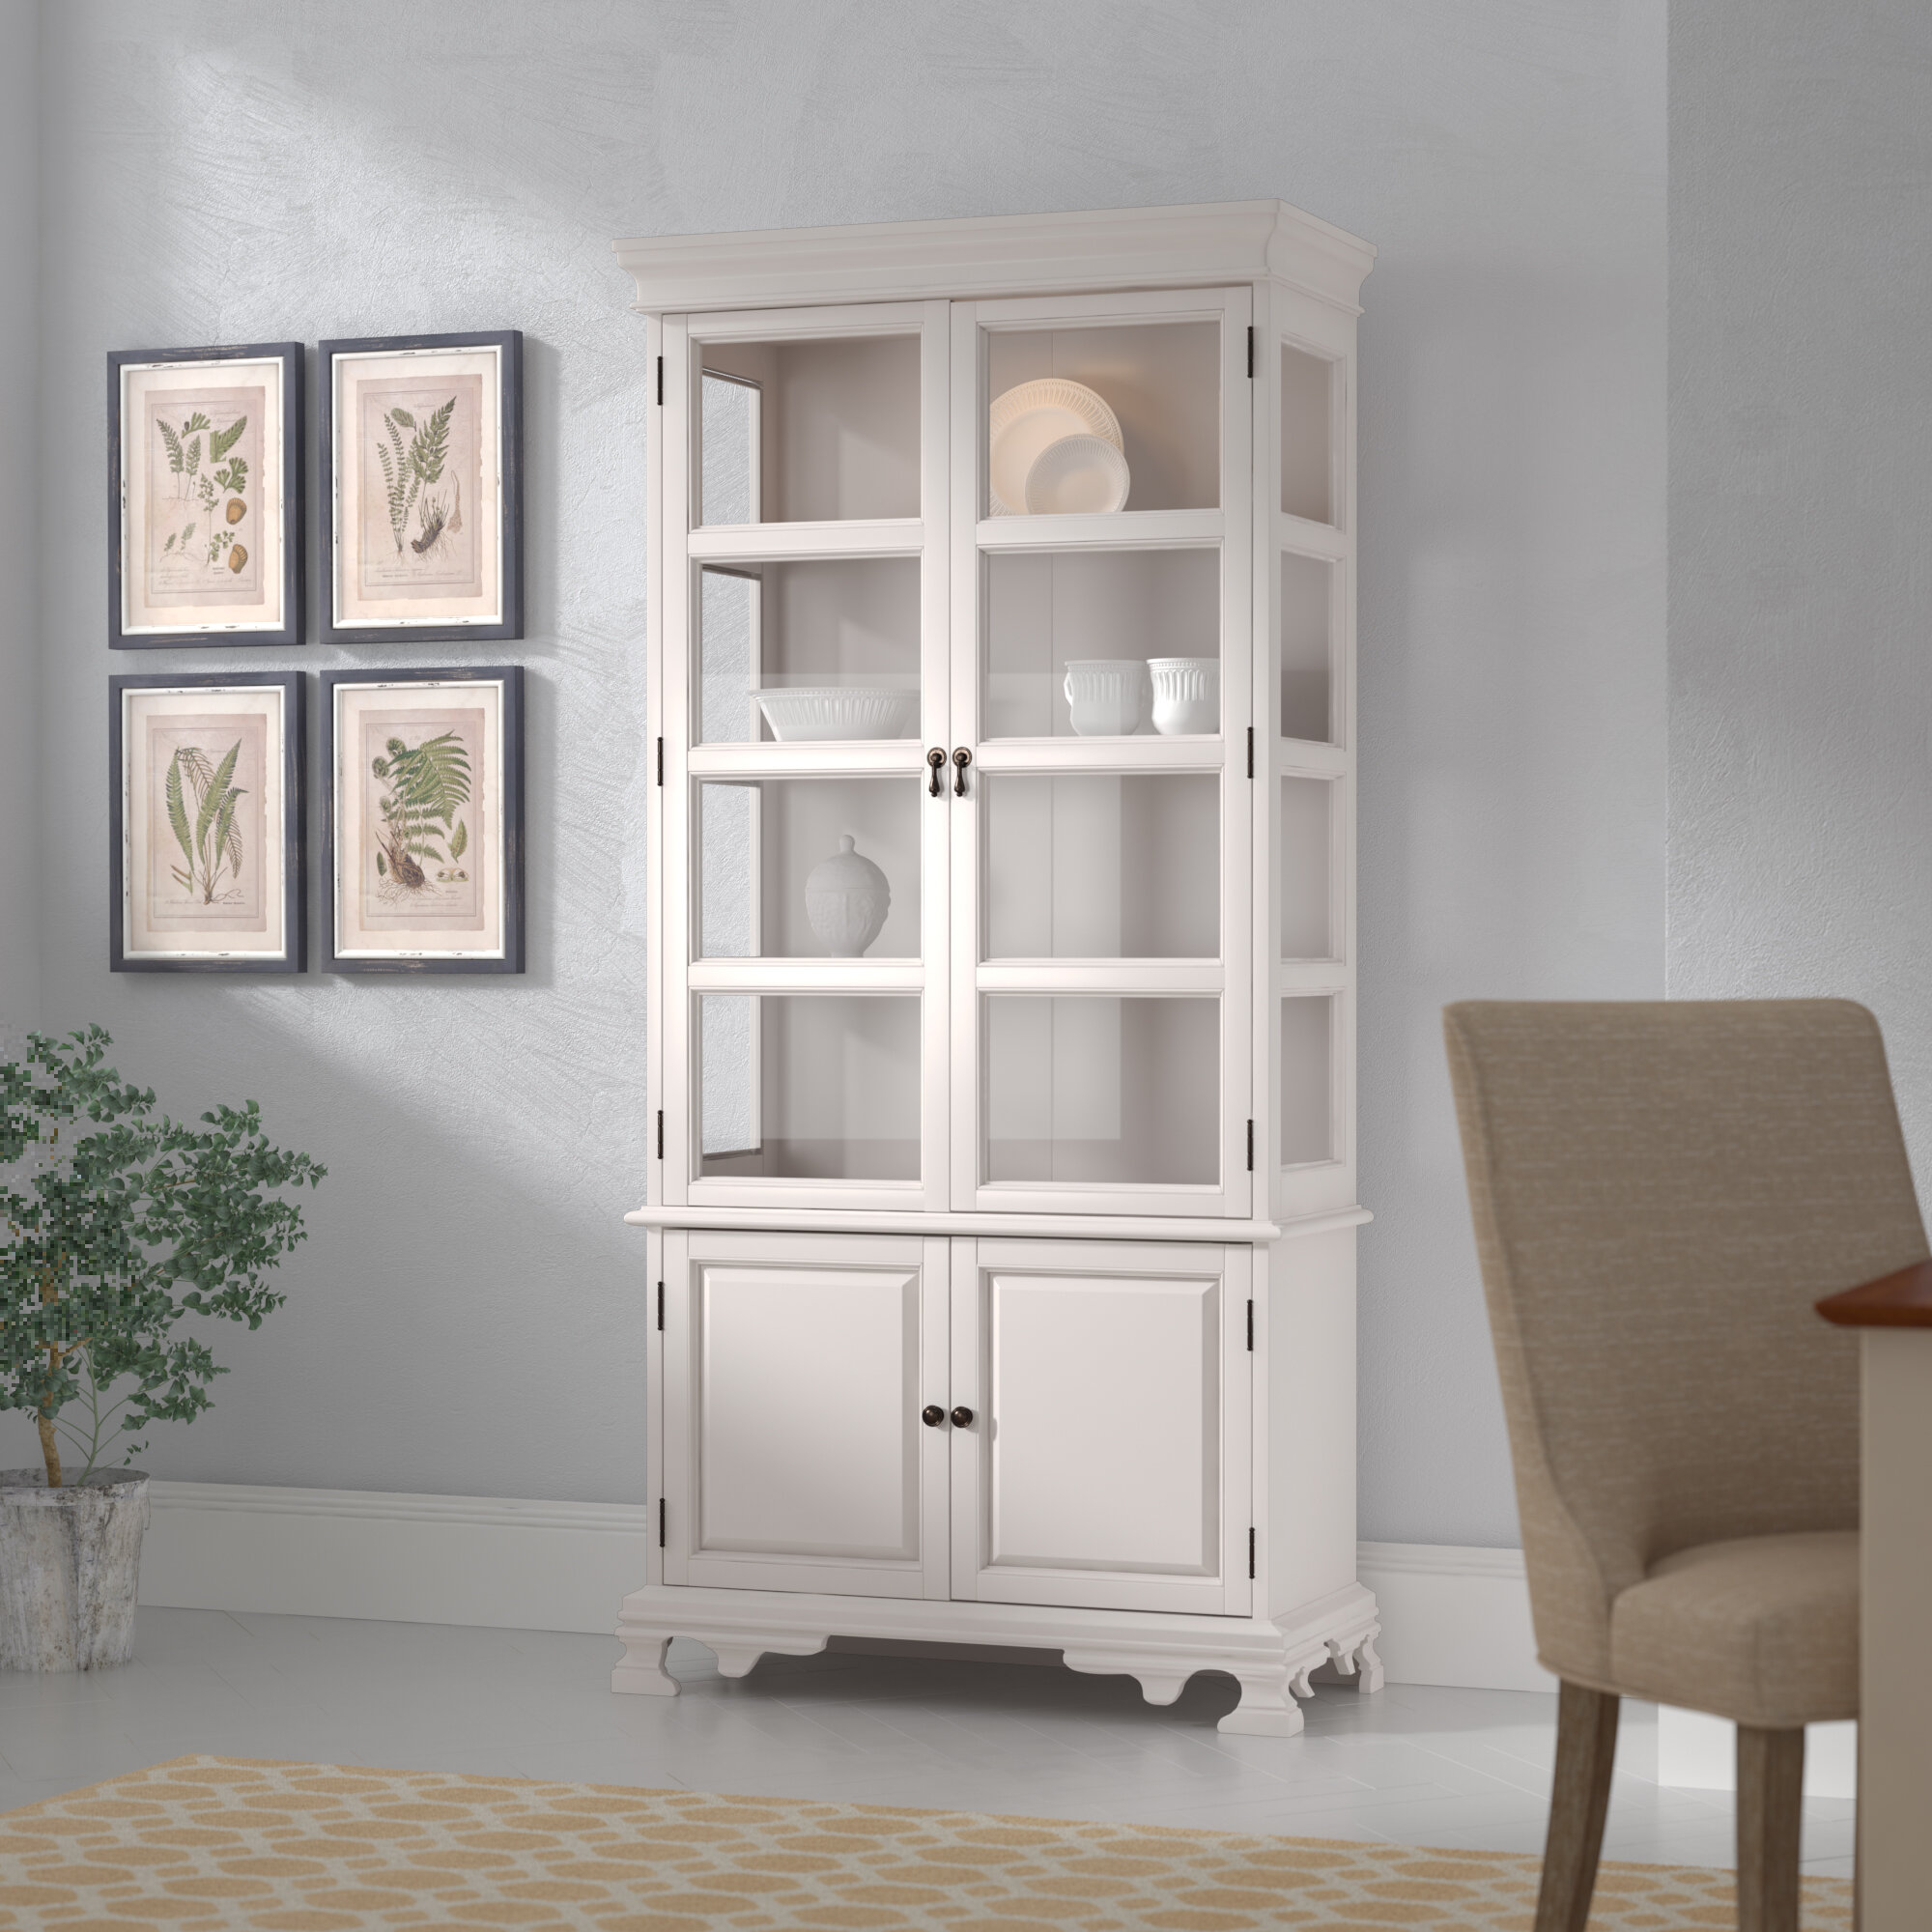 China Cabinets You Ll Love In 2020 Wayfair